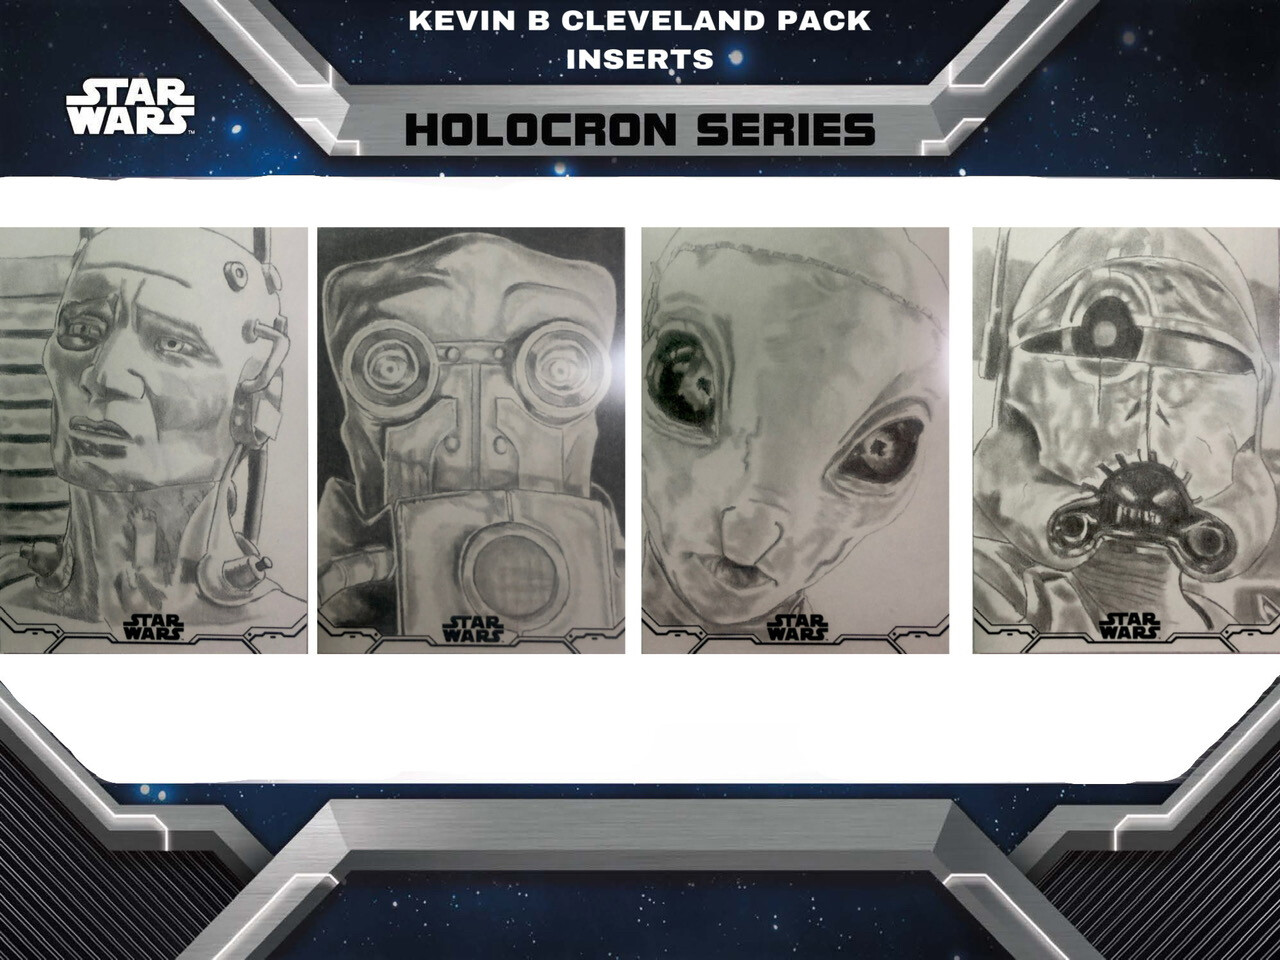 Topps Star Wars Holocron pack inserted sketch cards